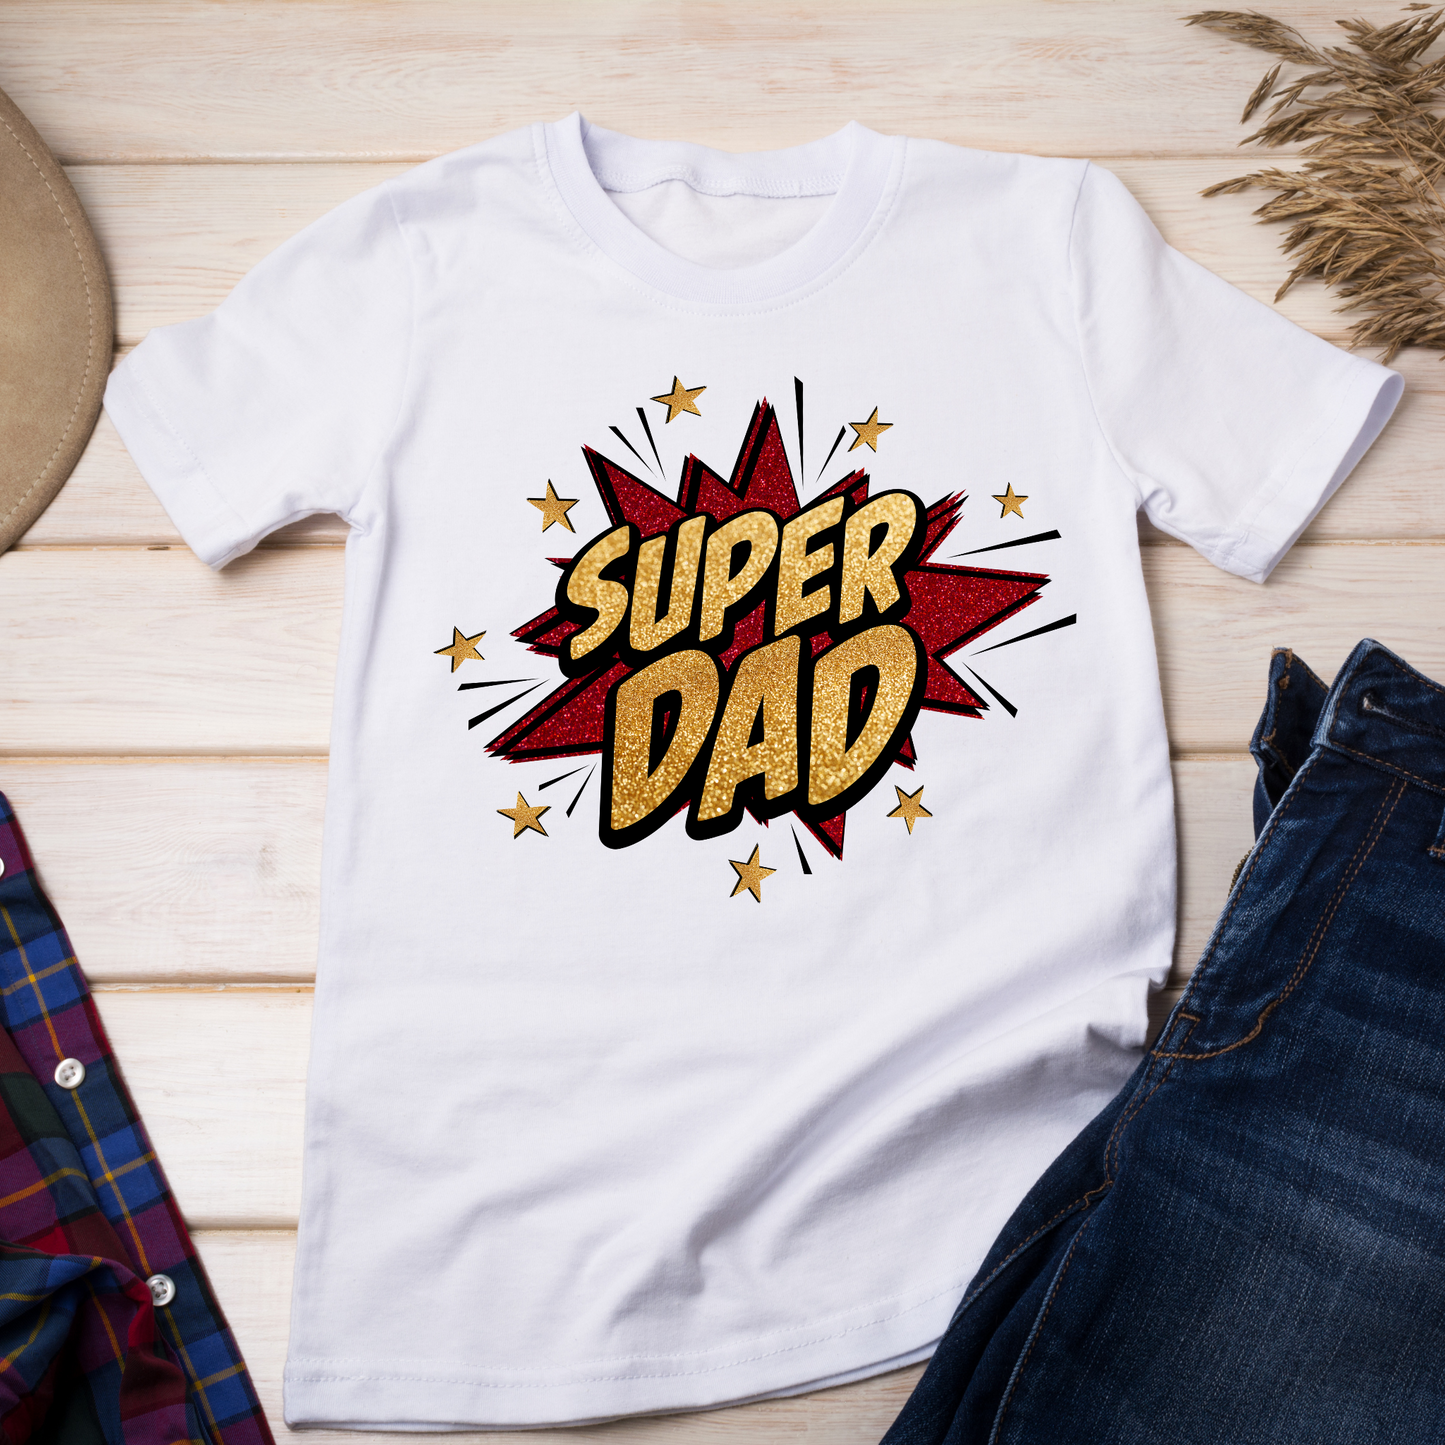 Super Dad T-Shirt - Gift for Dad